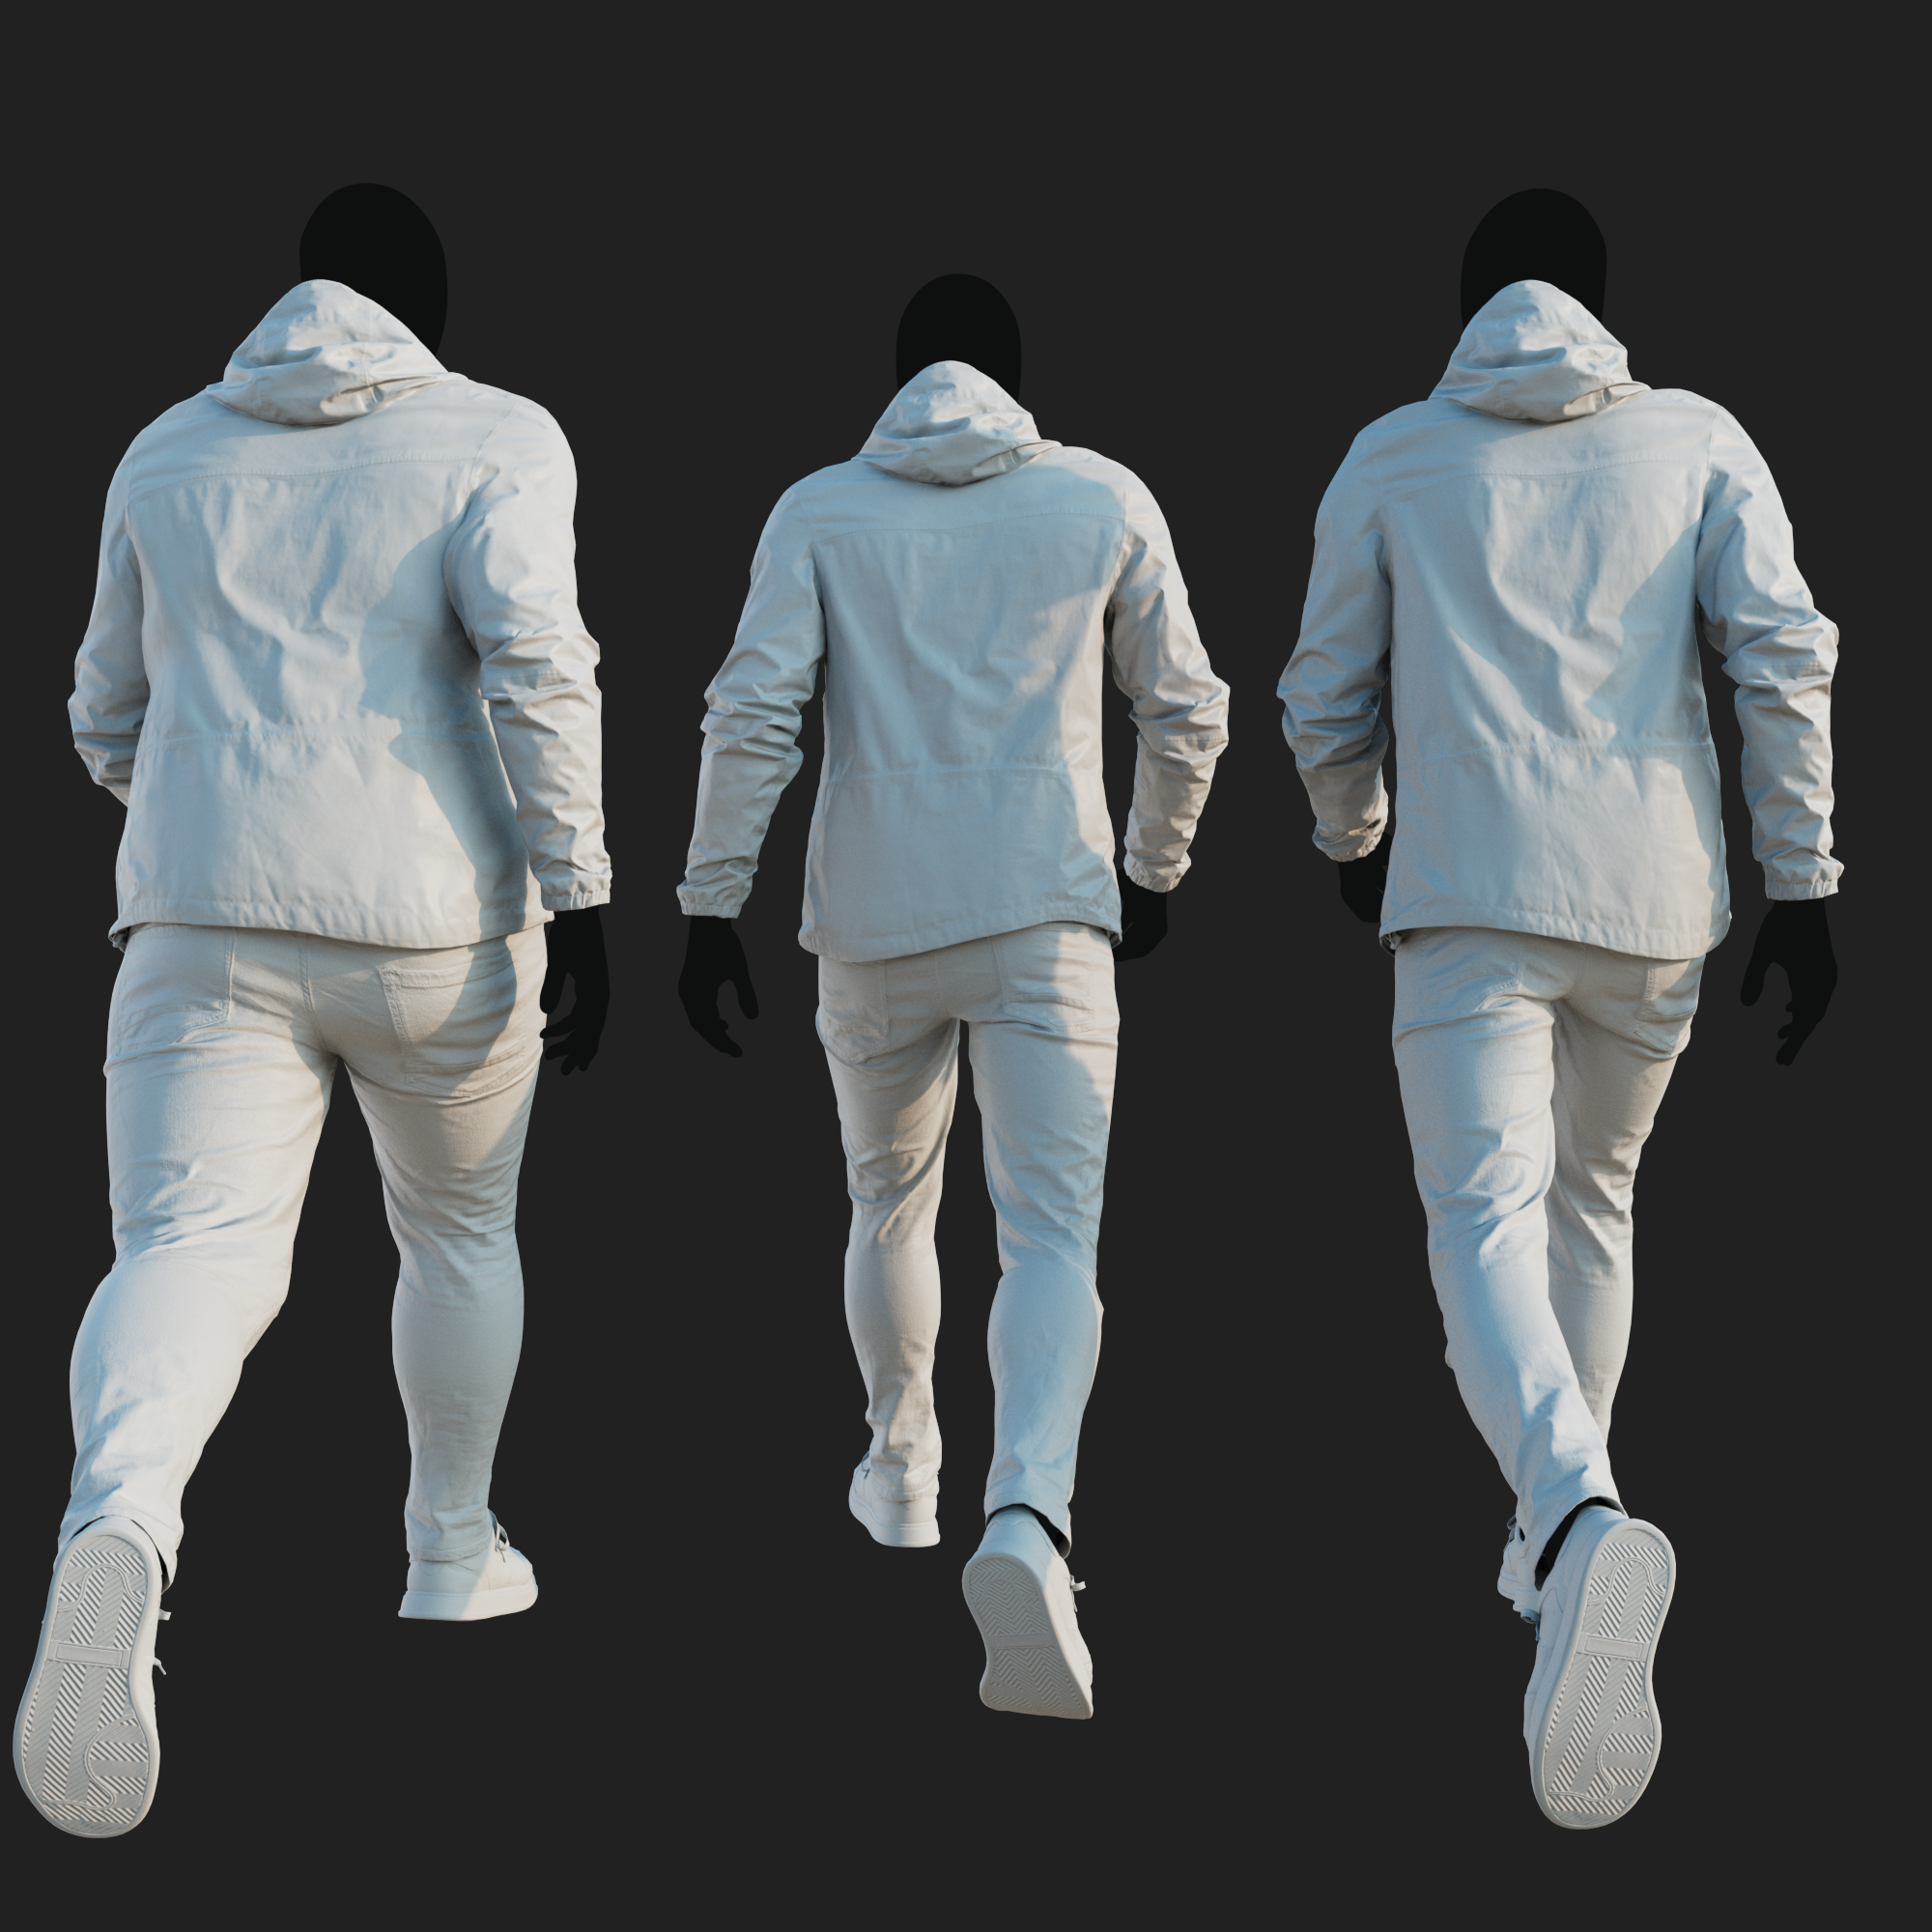 Ambient Occlusion map rendering of a 3D model of an animated walking male character dressed in a Camouflage Jacket and Jeans - back view